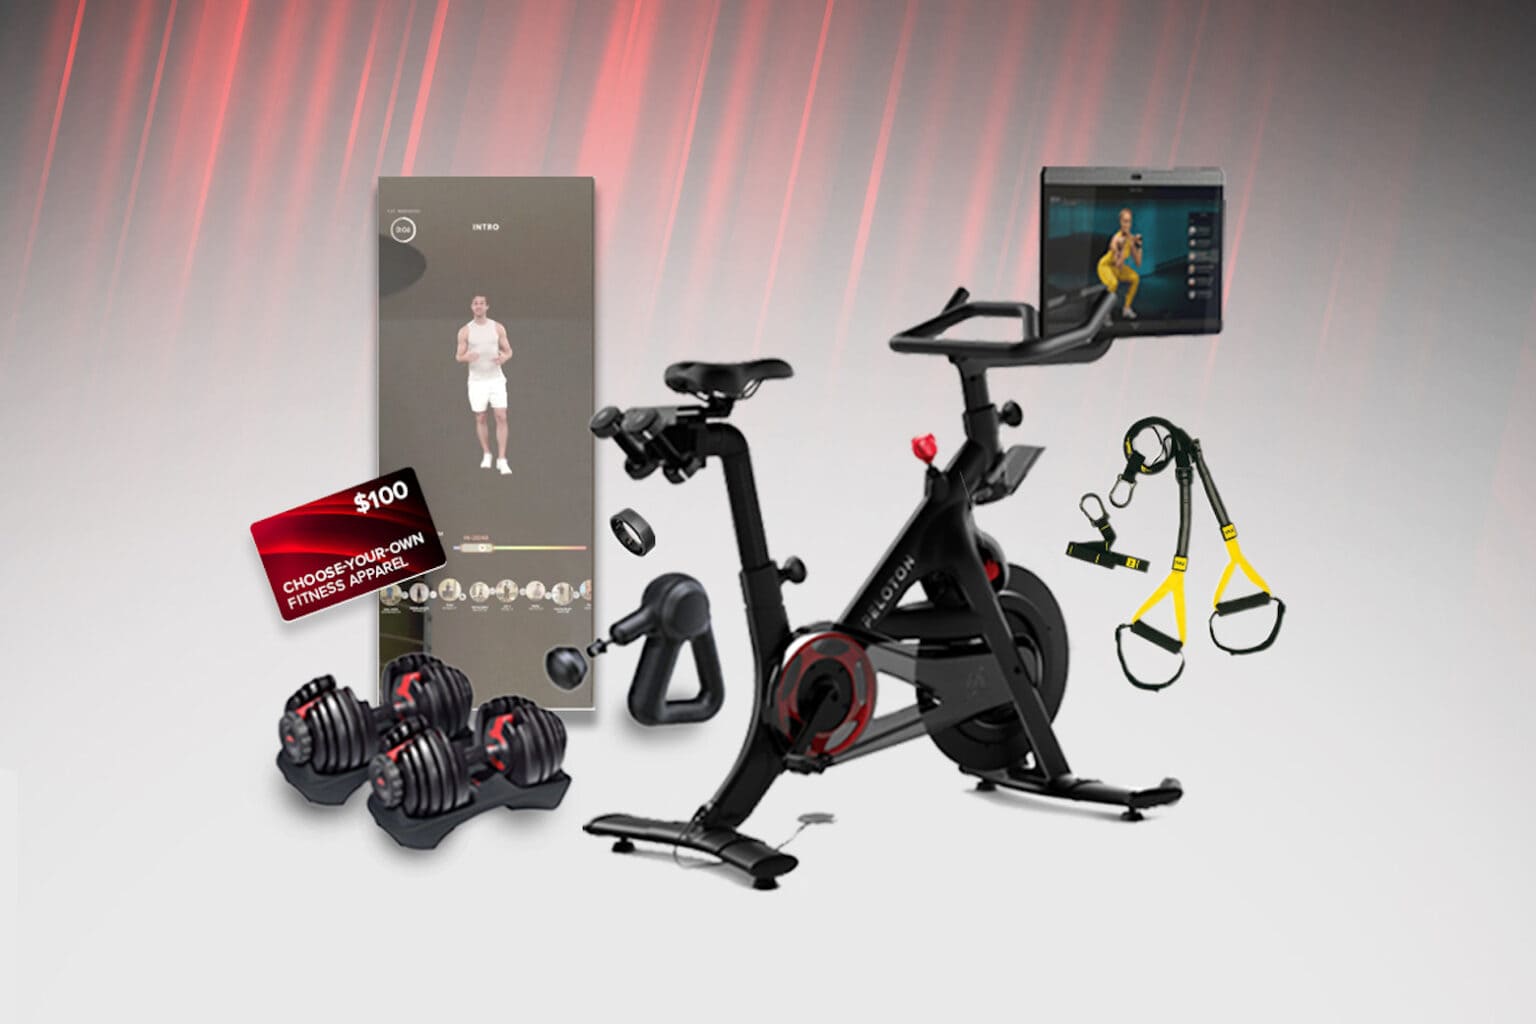 Bring the gym to your house by entering to win this Peloton giveaway